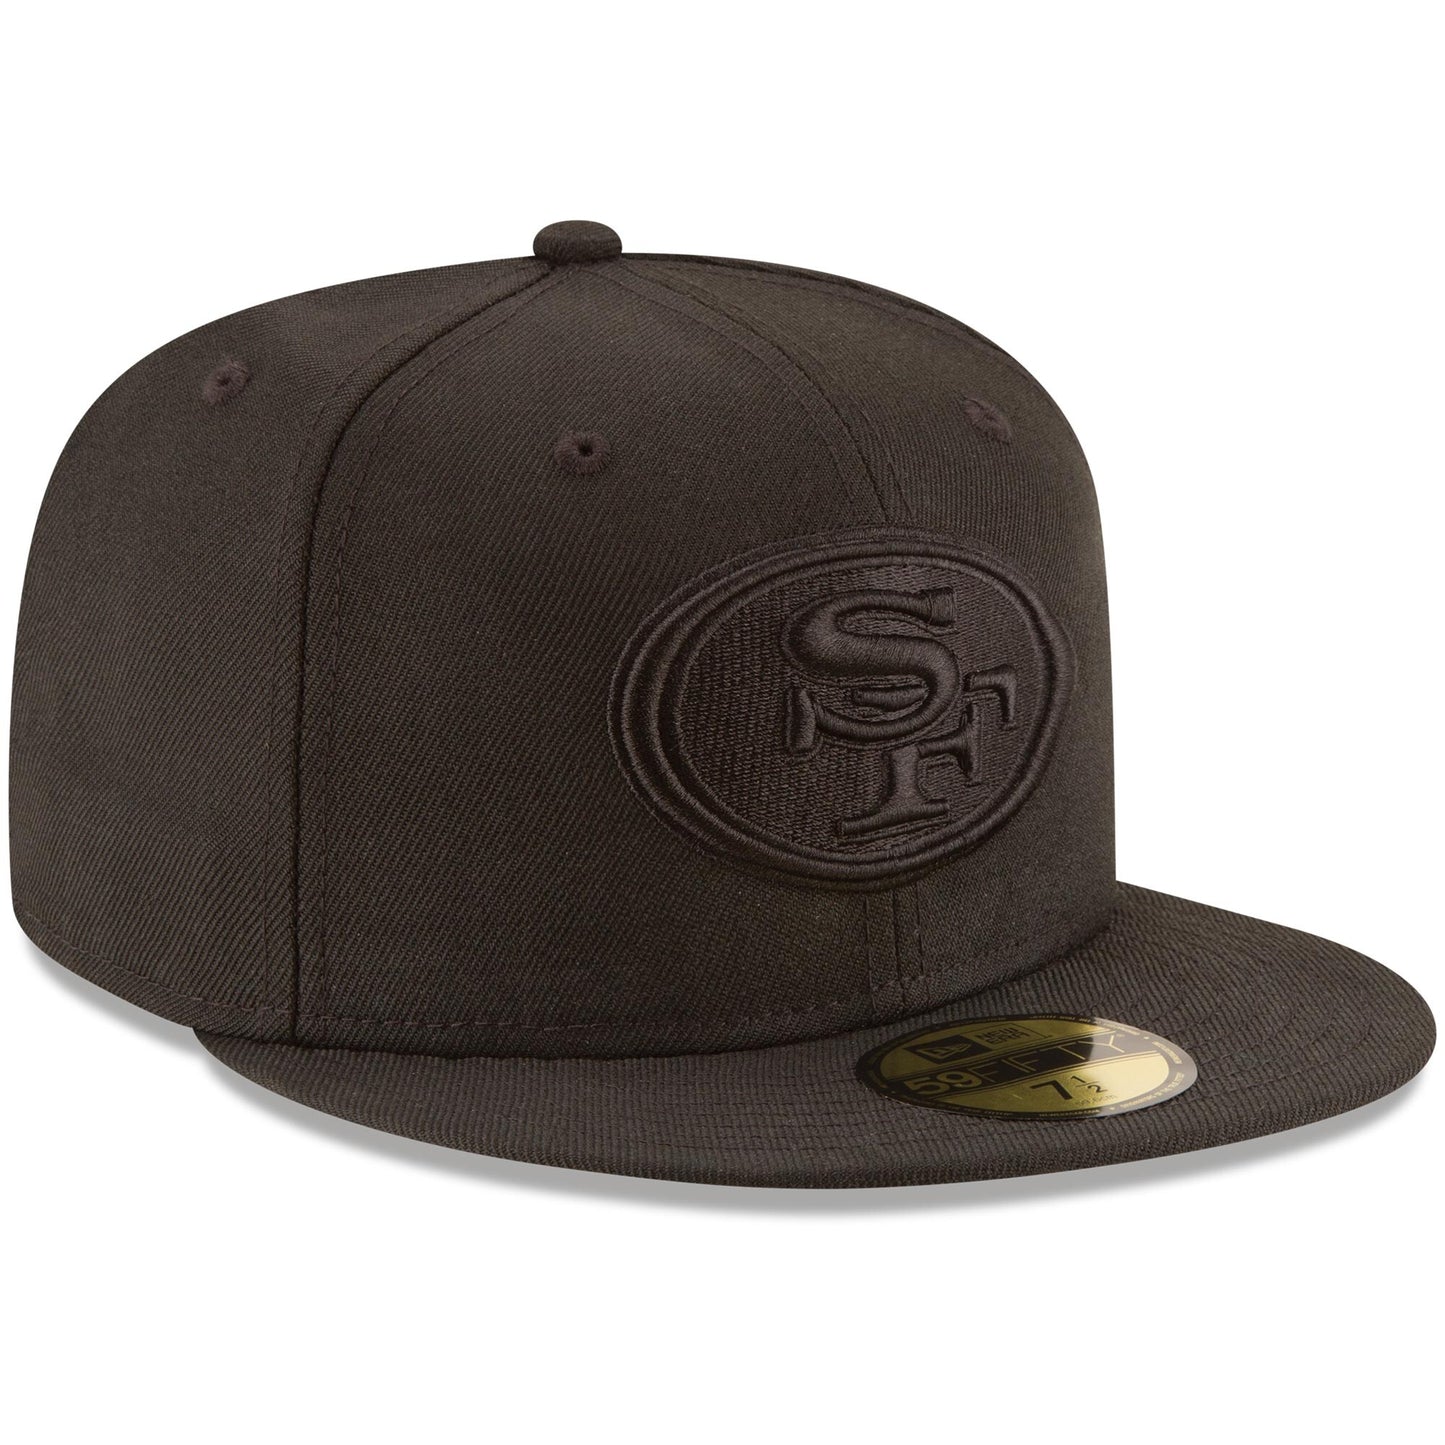 Men's San Francisco 49ers New Era Black On Black 59FIFTY Fitted Hat